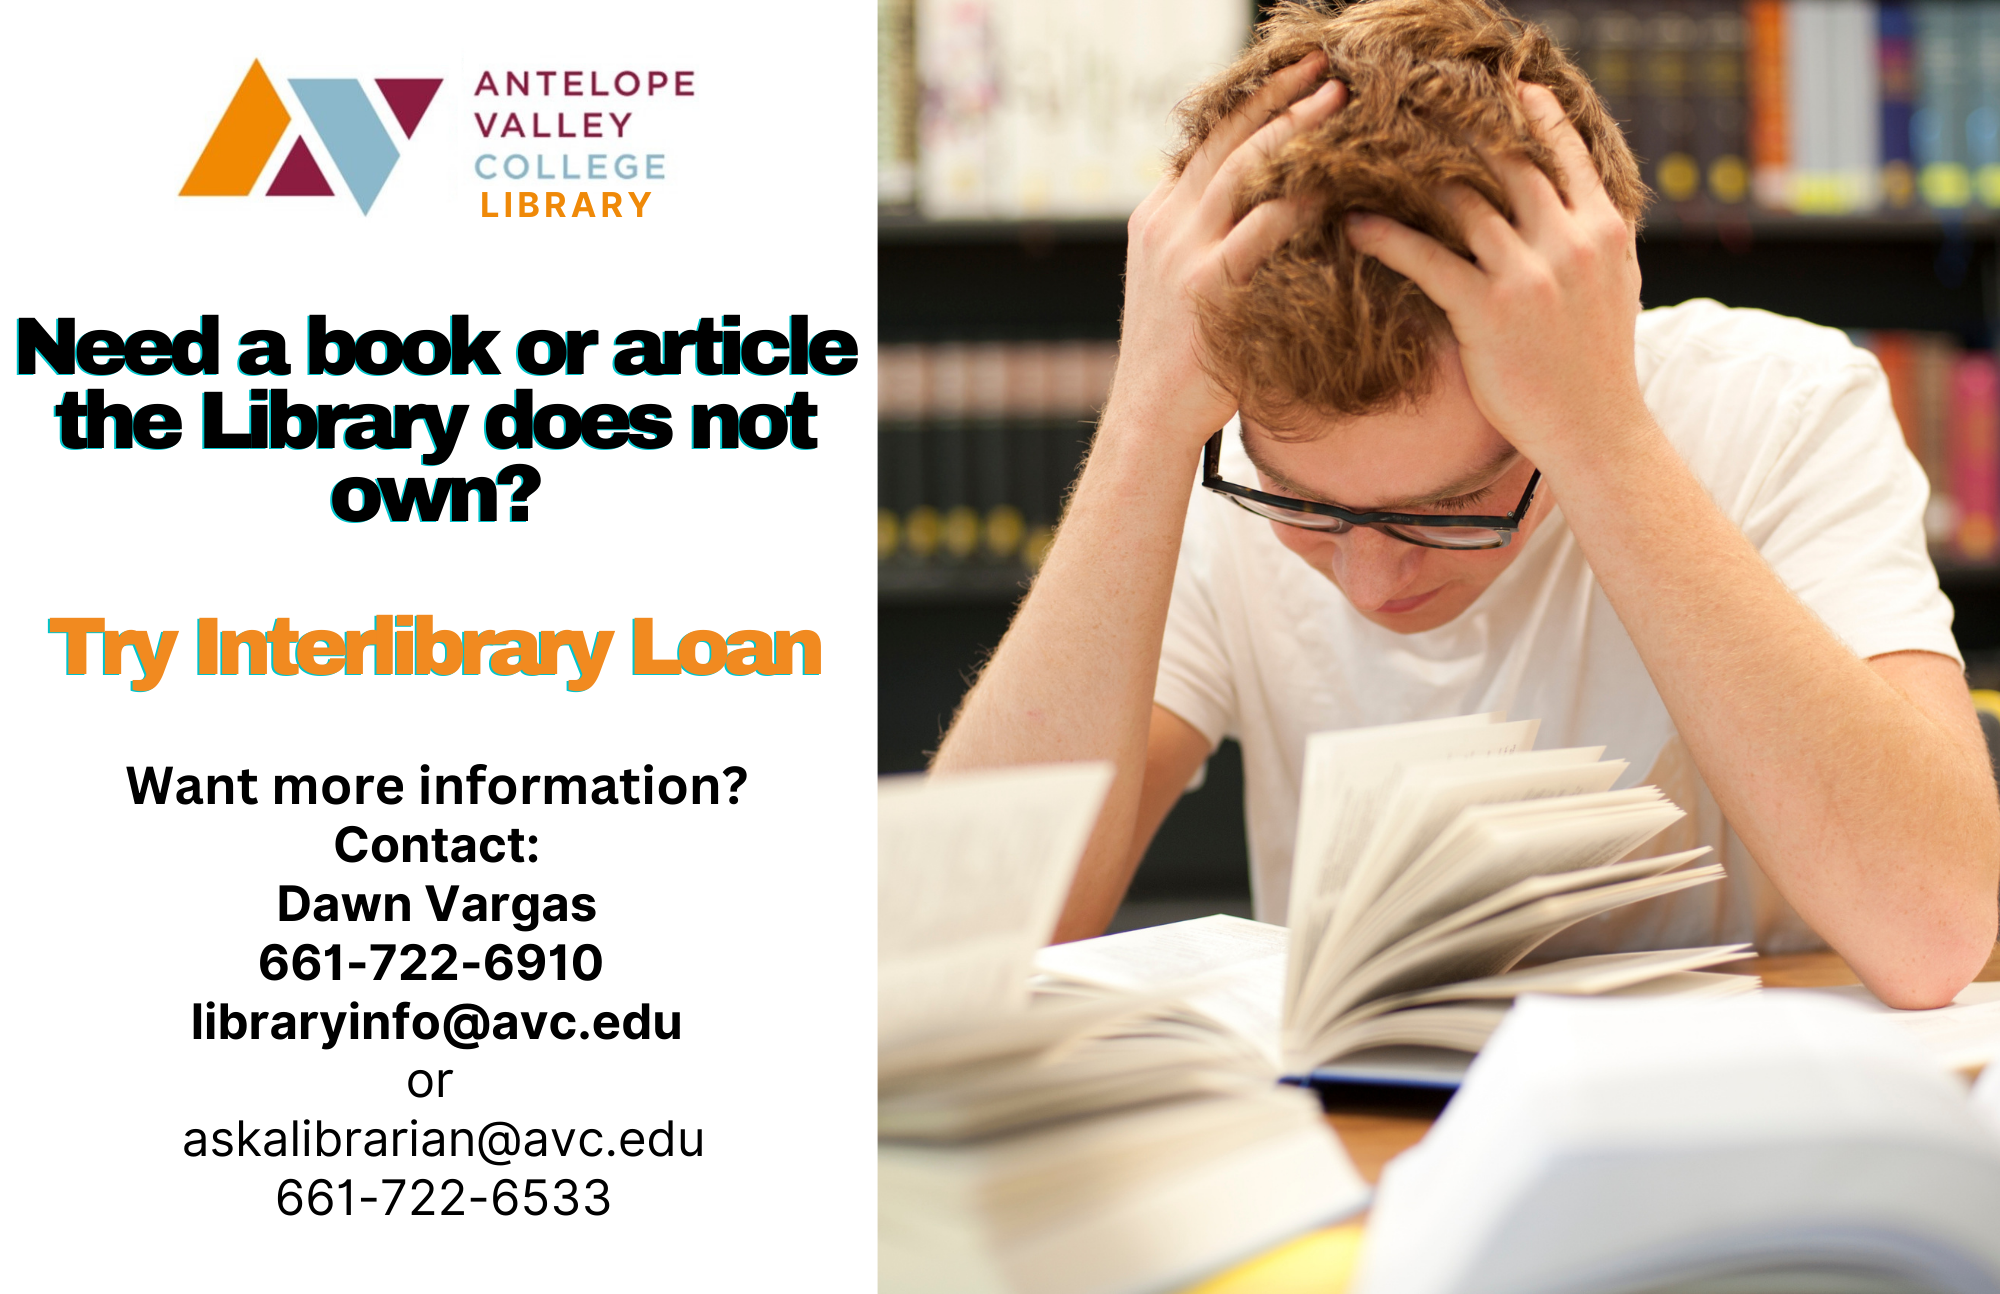 Need a book or article the library doesn't own? Try InterLibrary Loan - a library service to get you resources from other places! Contact Dawn Vargas: 661-722-6910, email libraryinfo@avc.edu, OR email askalibrarian@avc.edu. You can always call the main library number: 661-722-6533 for more information.